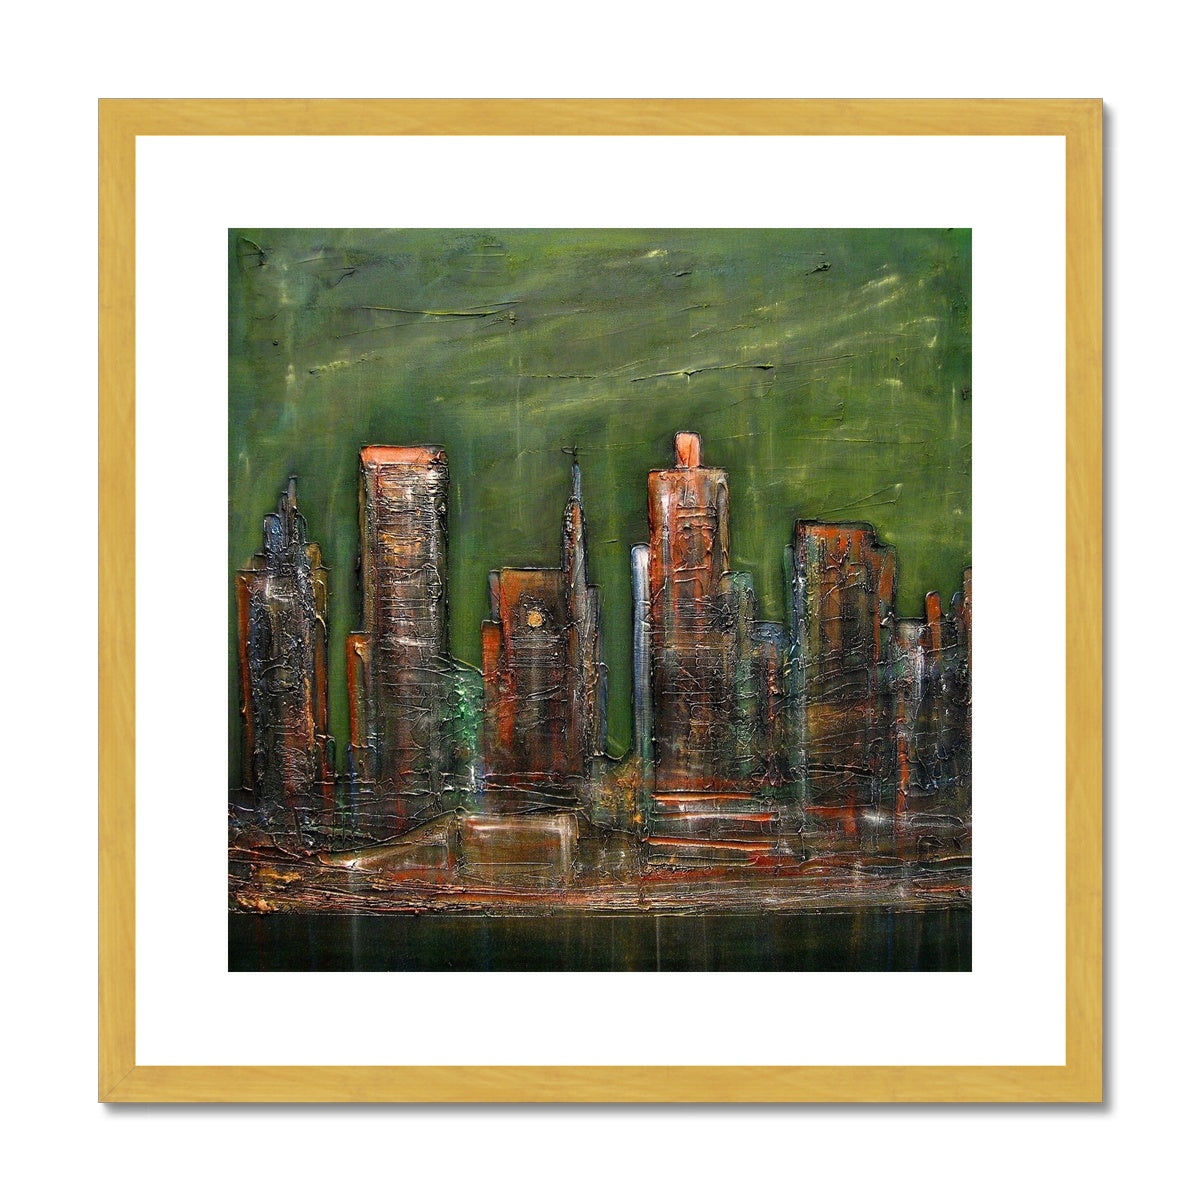 A Neon New York Painting | Antique Framed & Mounted Prints From Scotland-Antique Framed & Mounted Prints-World Art Gallery-20"x20"-Gold Frame-Paintings, Prints, Homeware, Art Gifts From Scotland By Scottish Artist Kevin Hunter